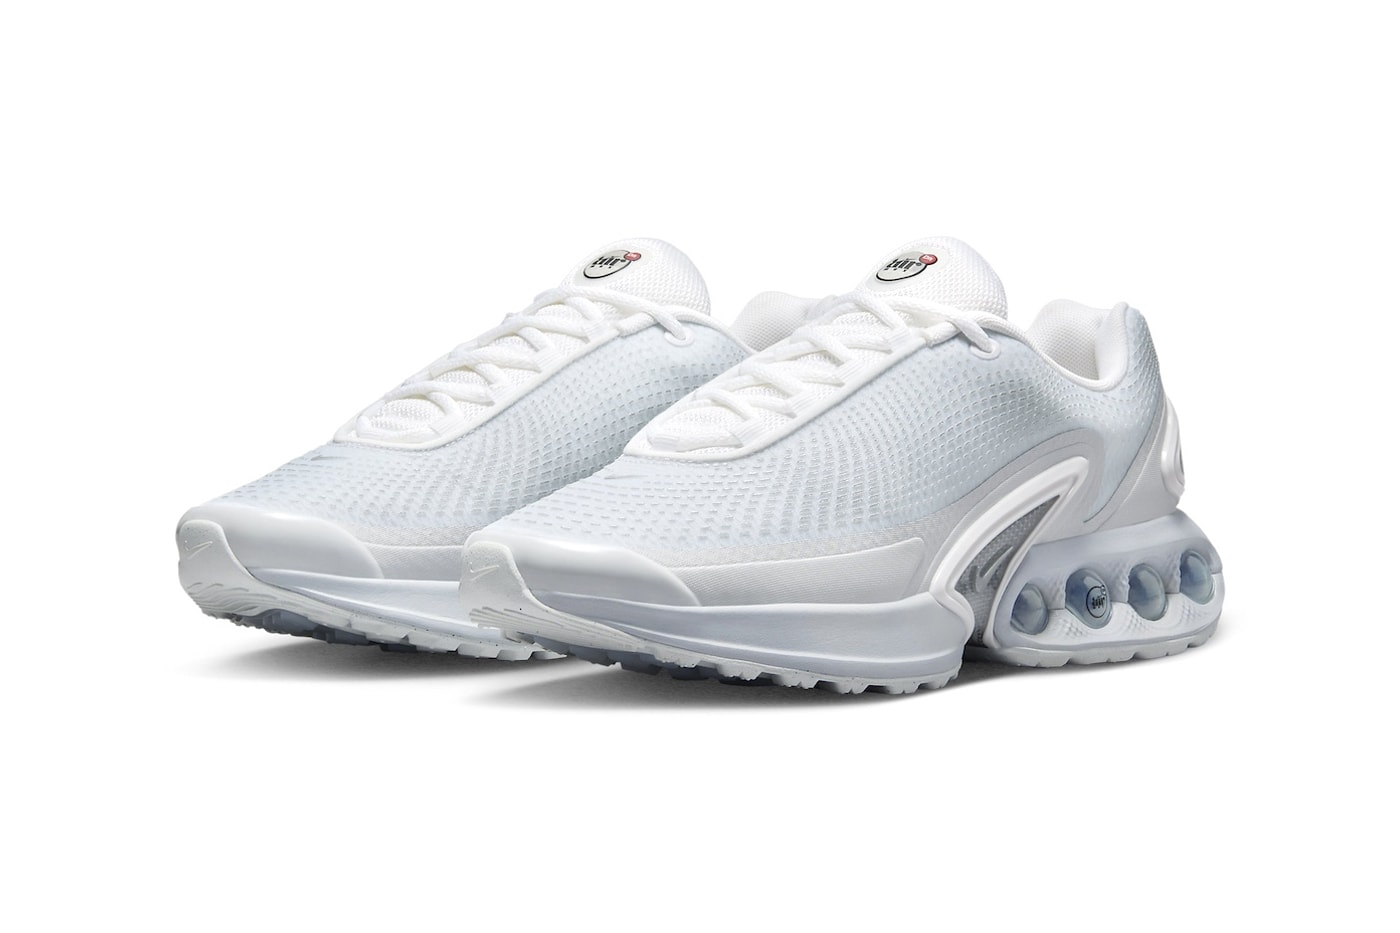 Nike Air Max DN Surfaces in a Clean White/Metallic Silver Colorway FJ3145-100 Release Info air max day swoosh